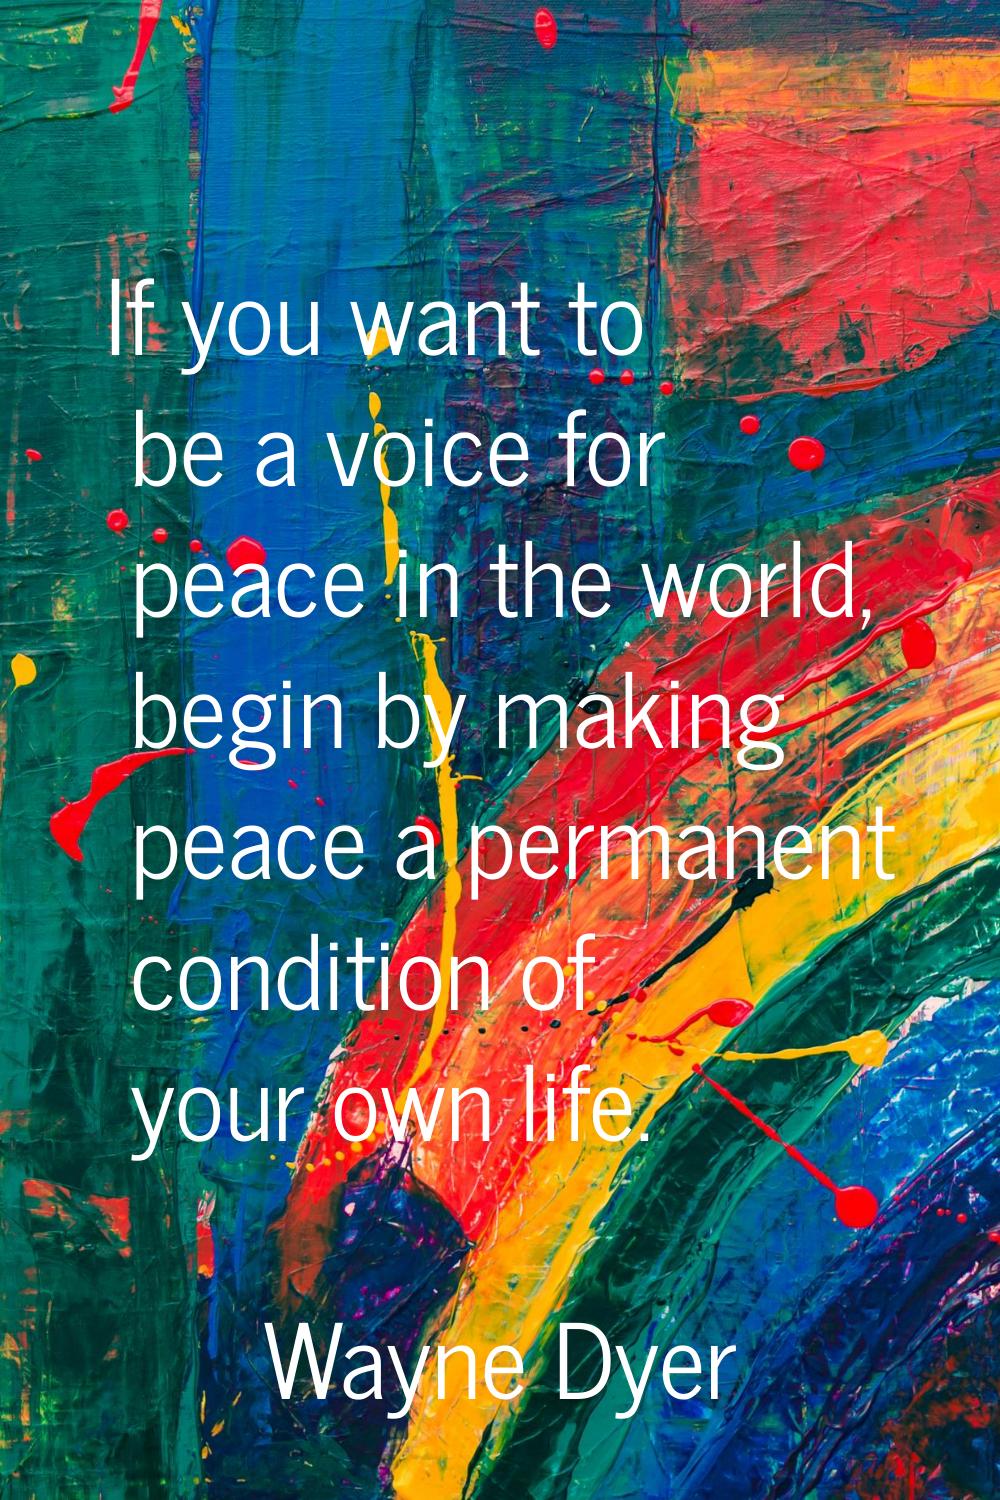 If you want to be a voice for peace in the world, begin by making peace a permanent condition of yo